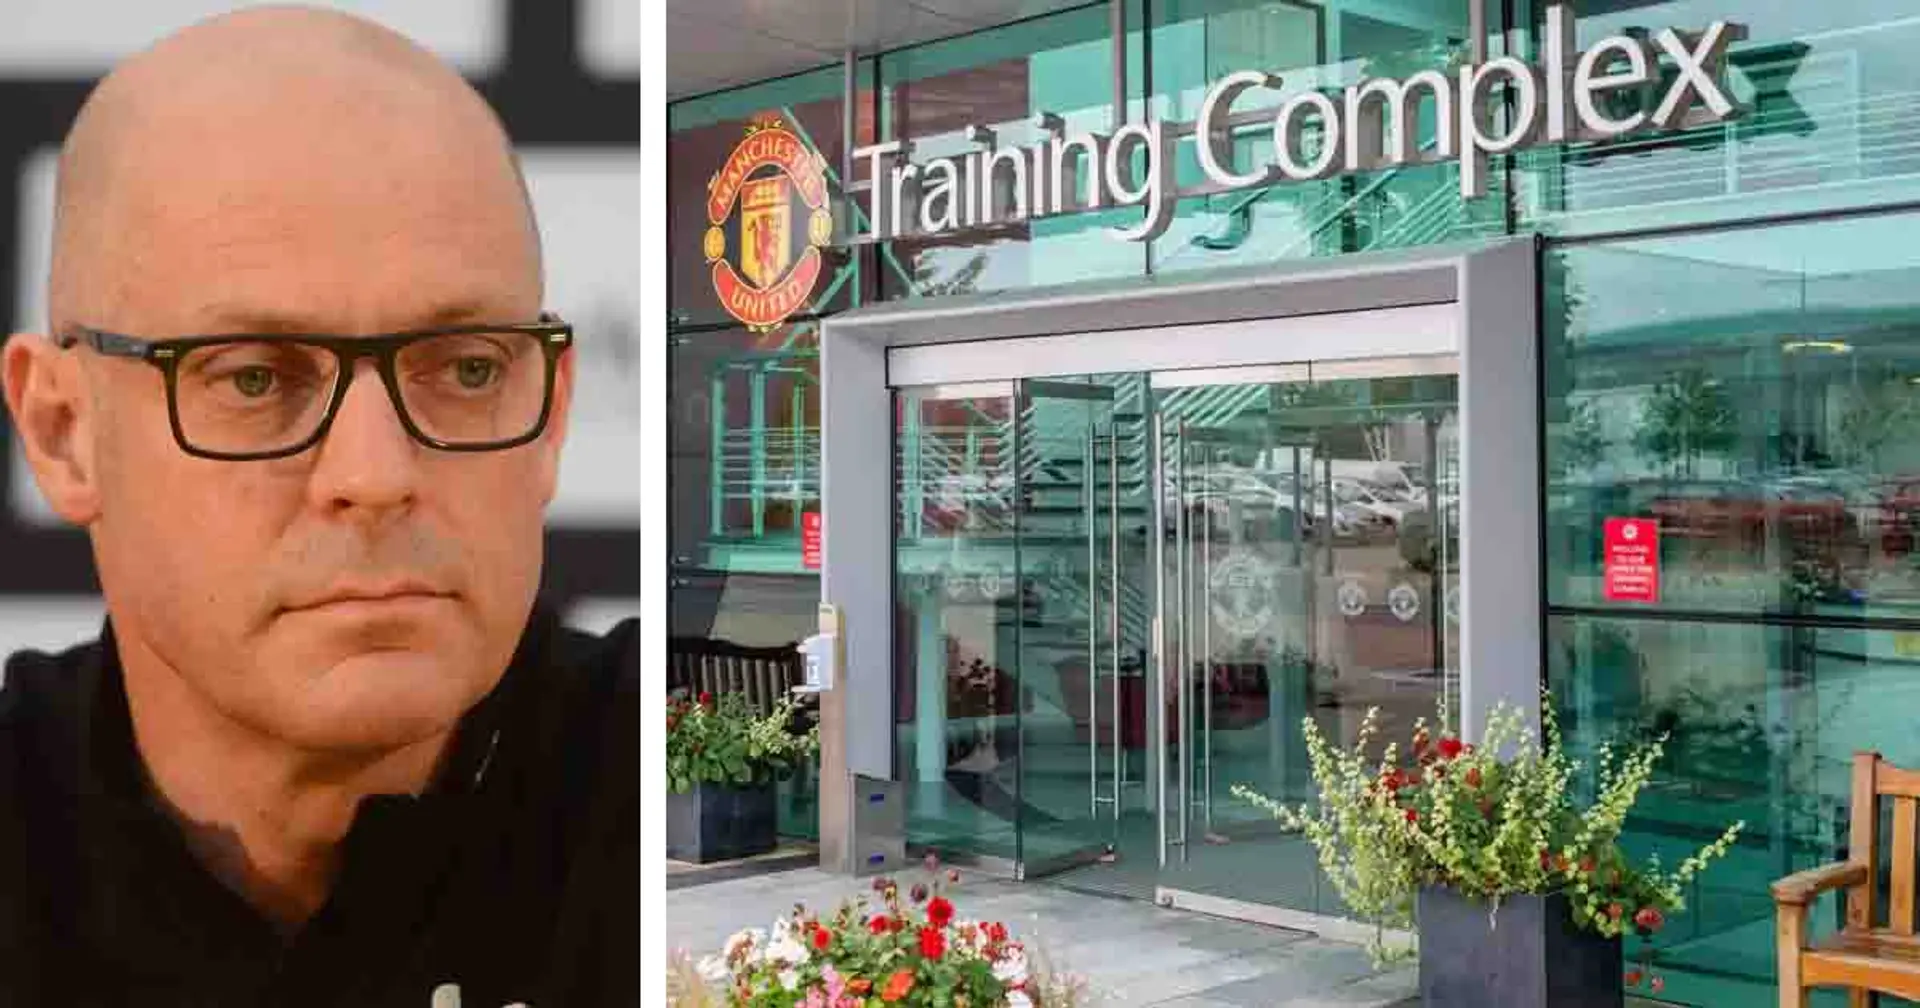 Man United planning to introduce three new elements in Carrington training facility overhaul